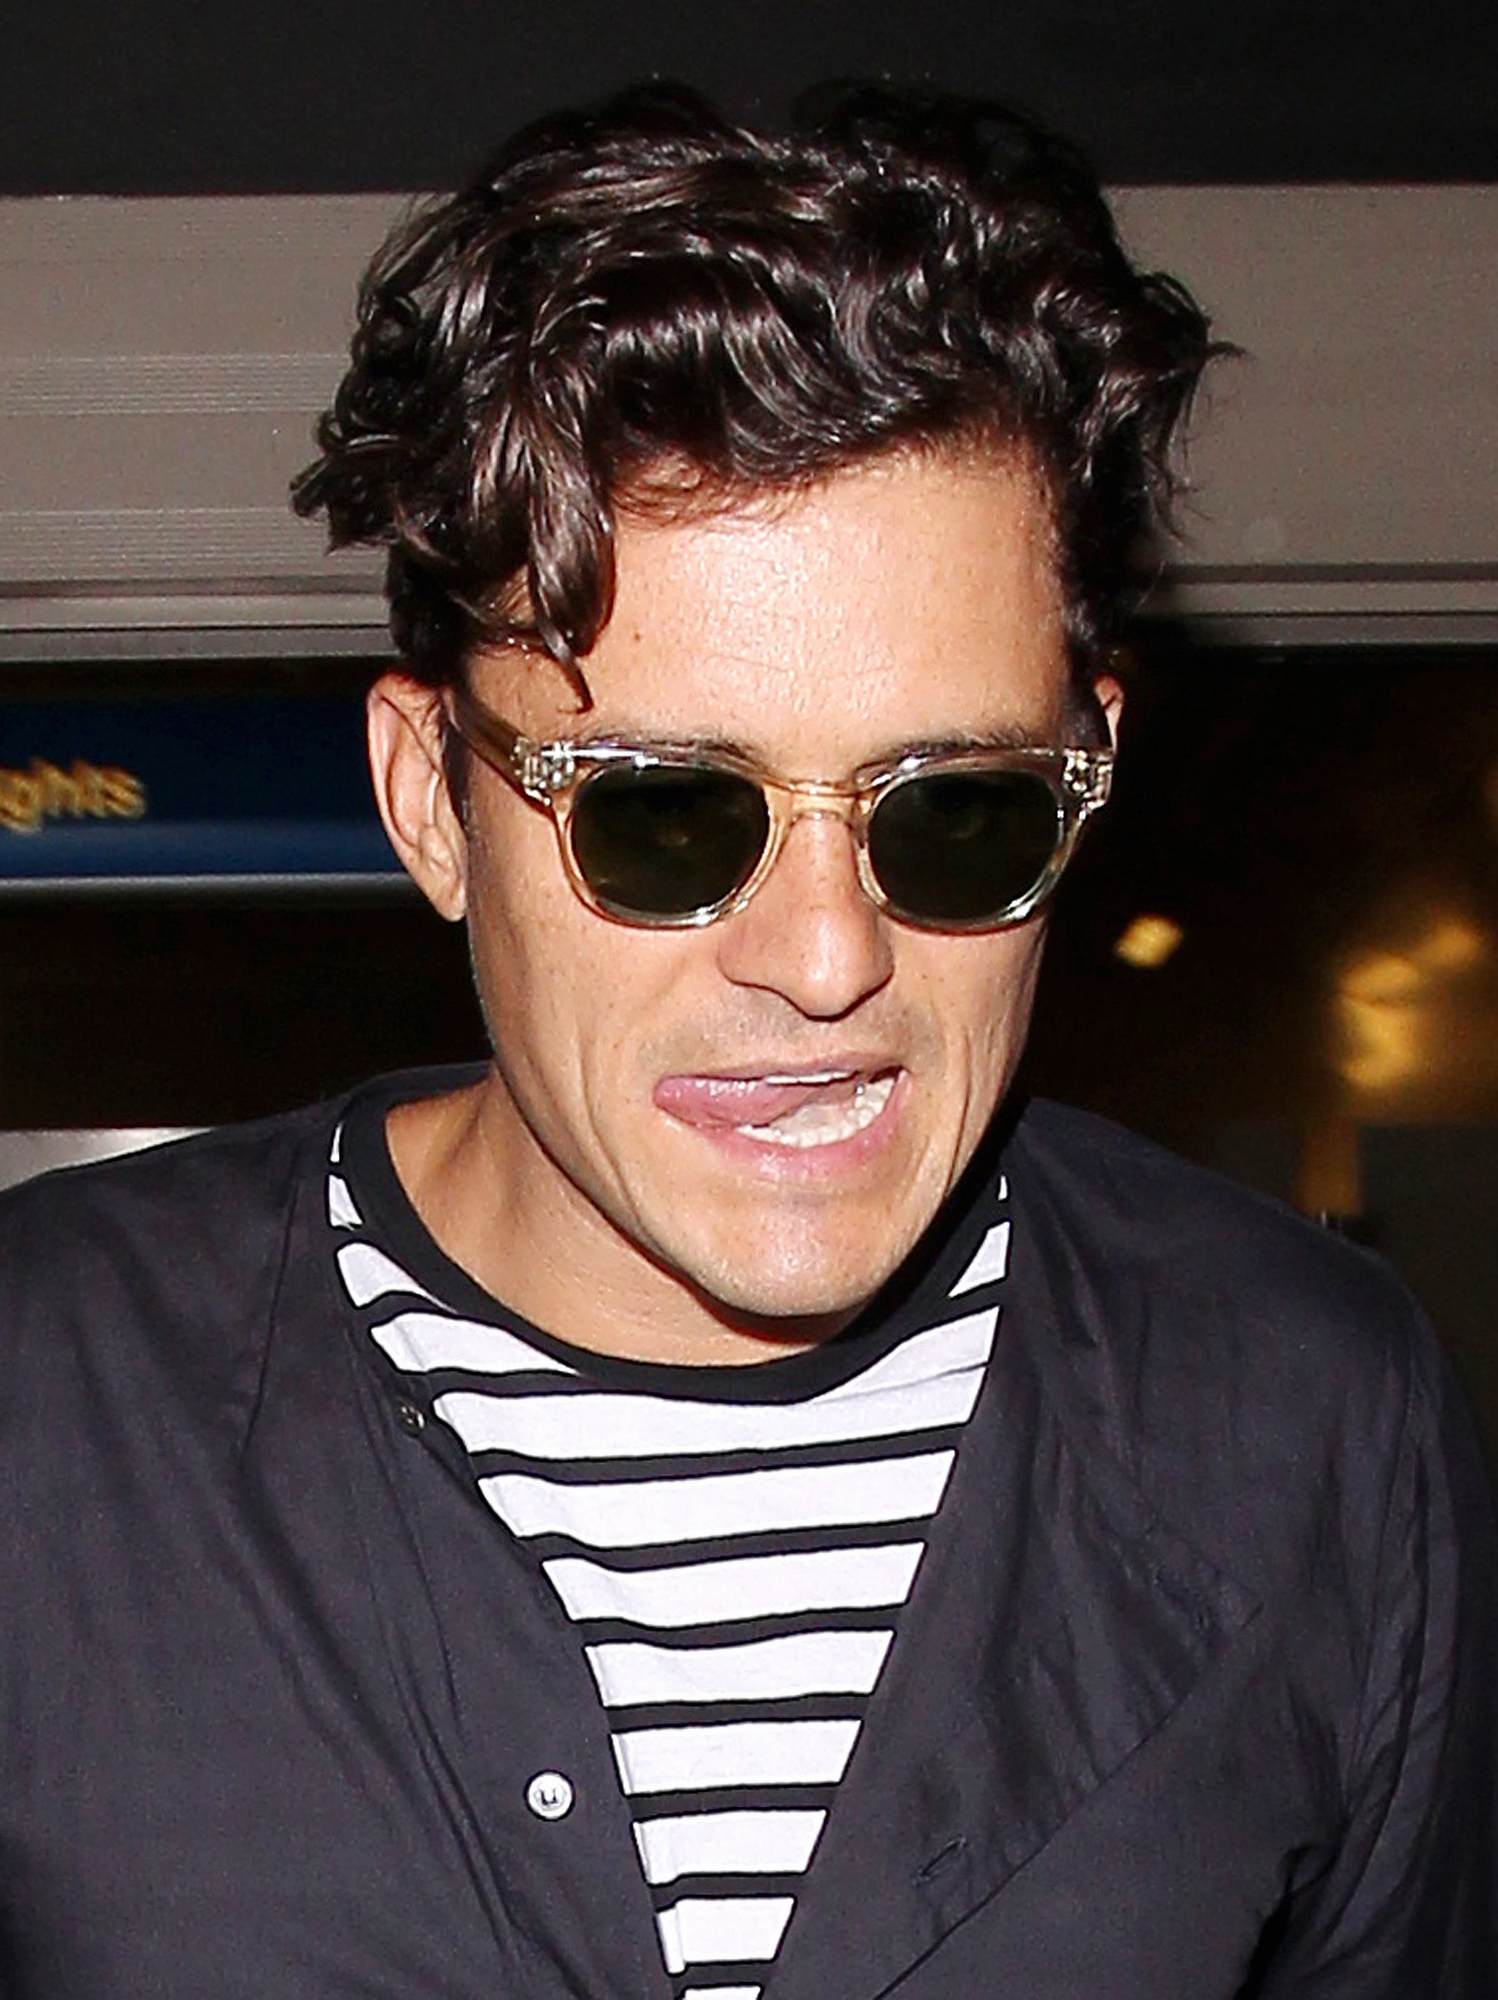 Orlando Bloom Arrives at LAX Airport